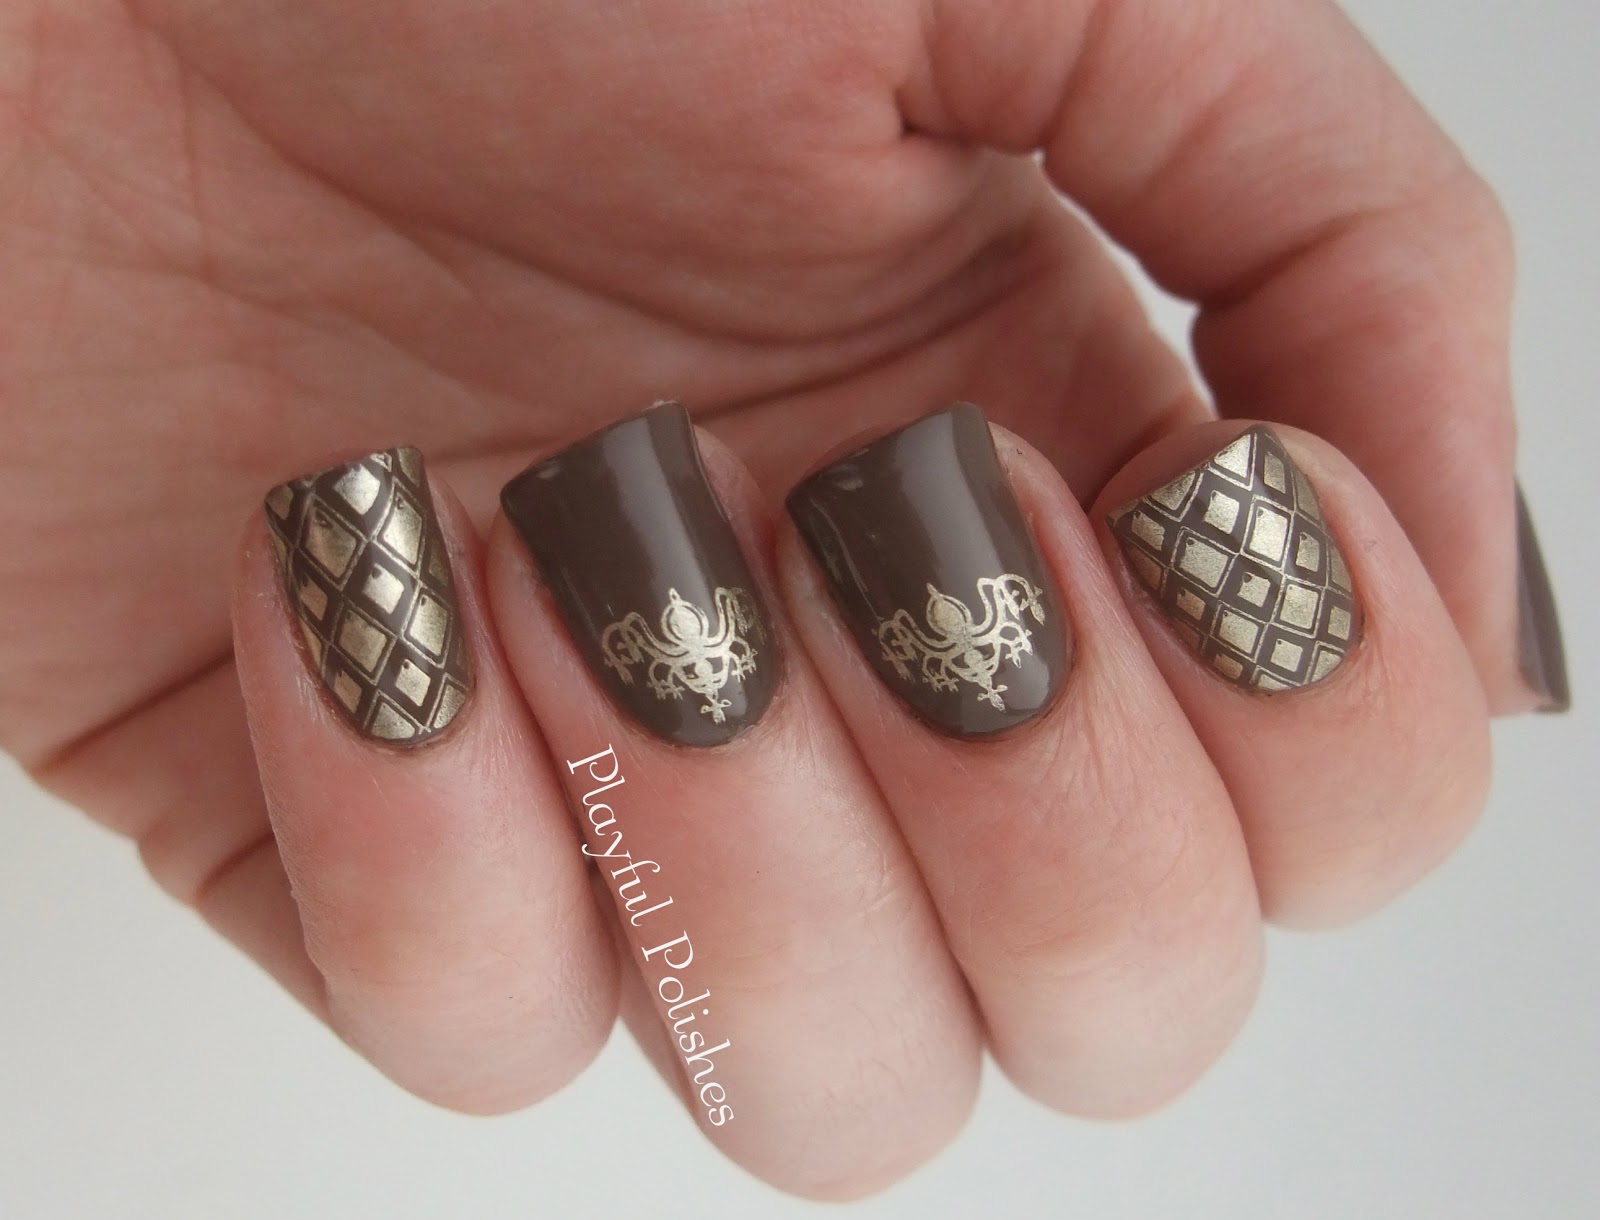 3. Snowflake Nail Designs for January - wide 4